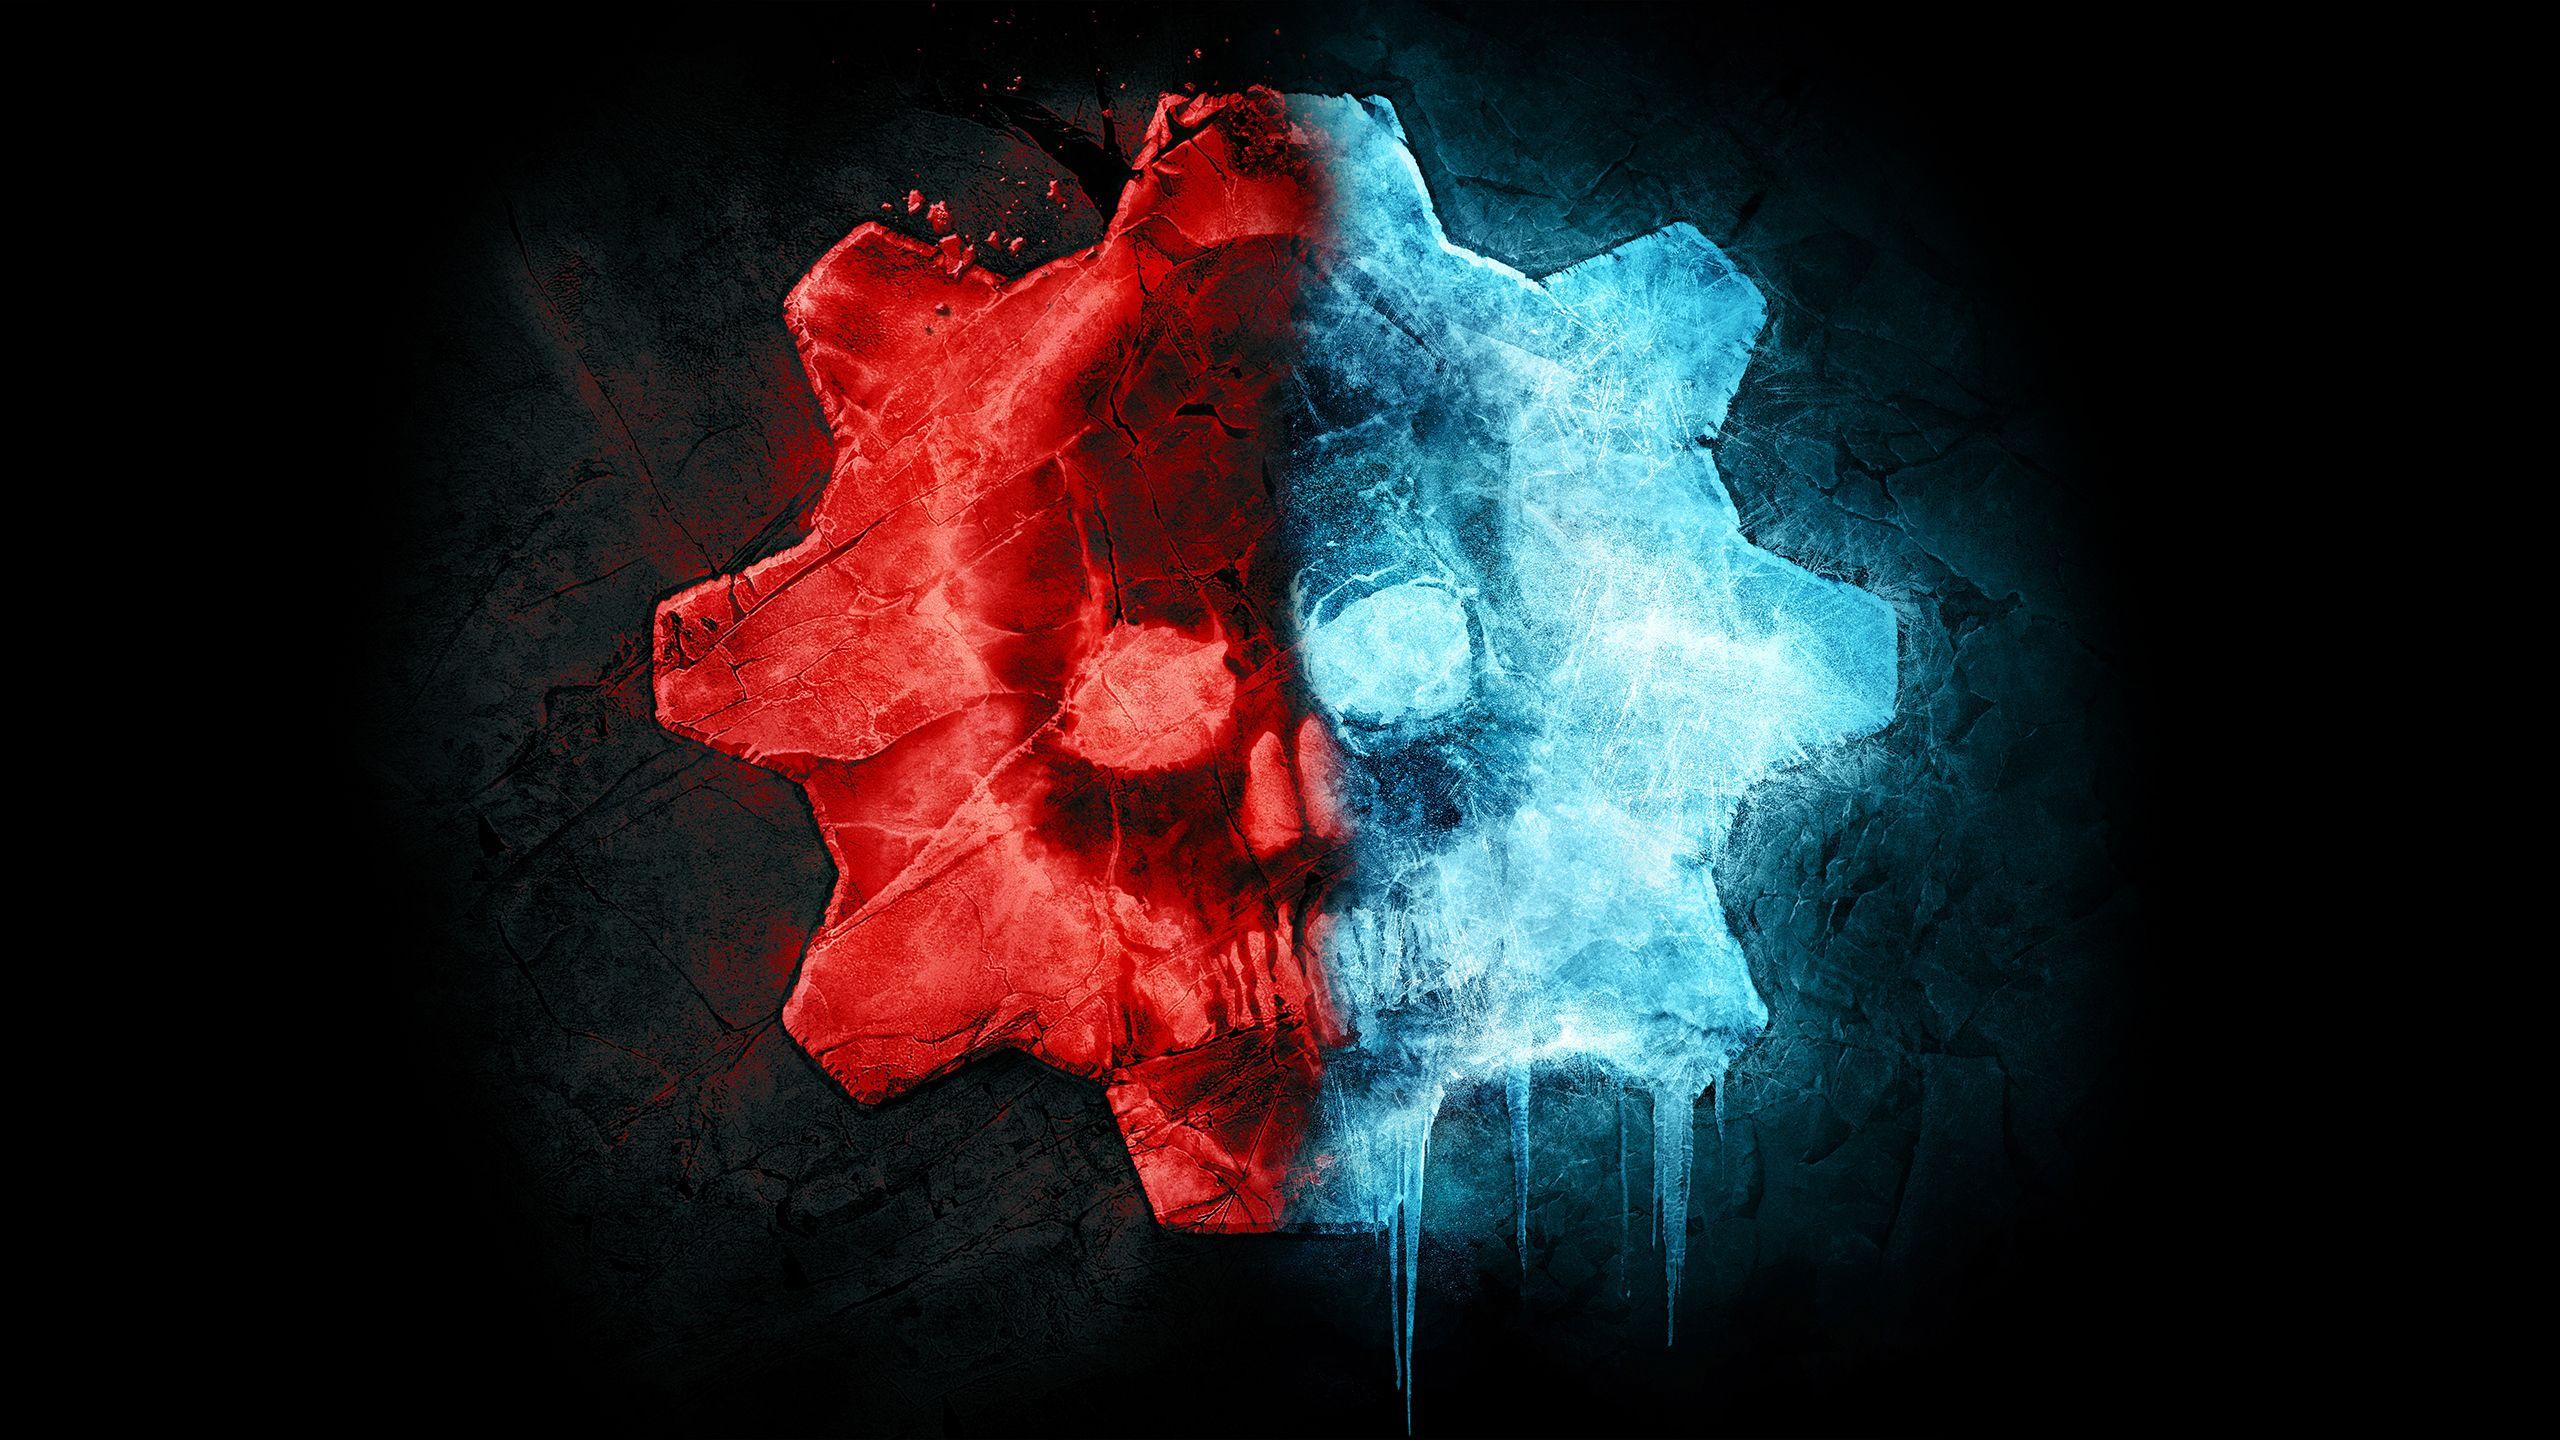 Gears 5 Wallpapers - Top Free Gears 5 Backgrounds - WallpaperAccess